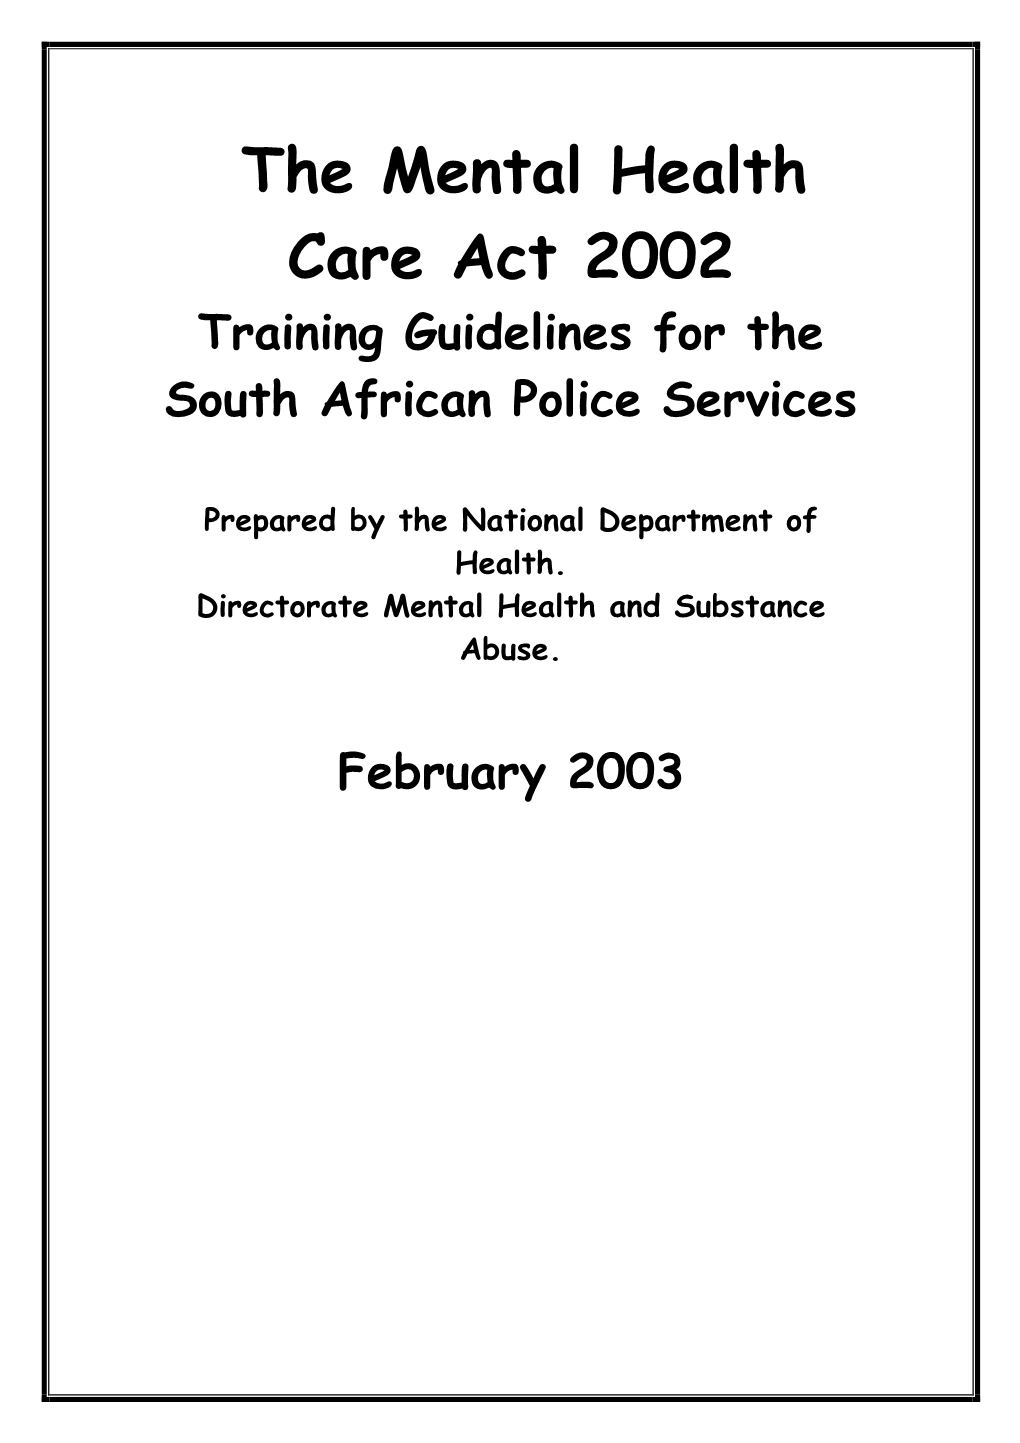 The Mental Health Care Act 2002 Training Guidelines for the South African Police Services